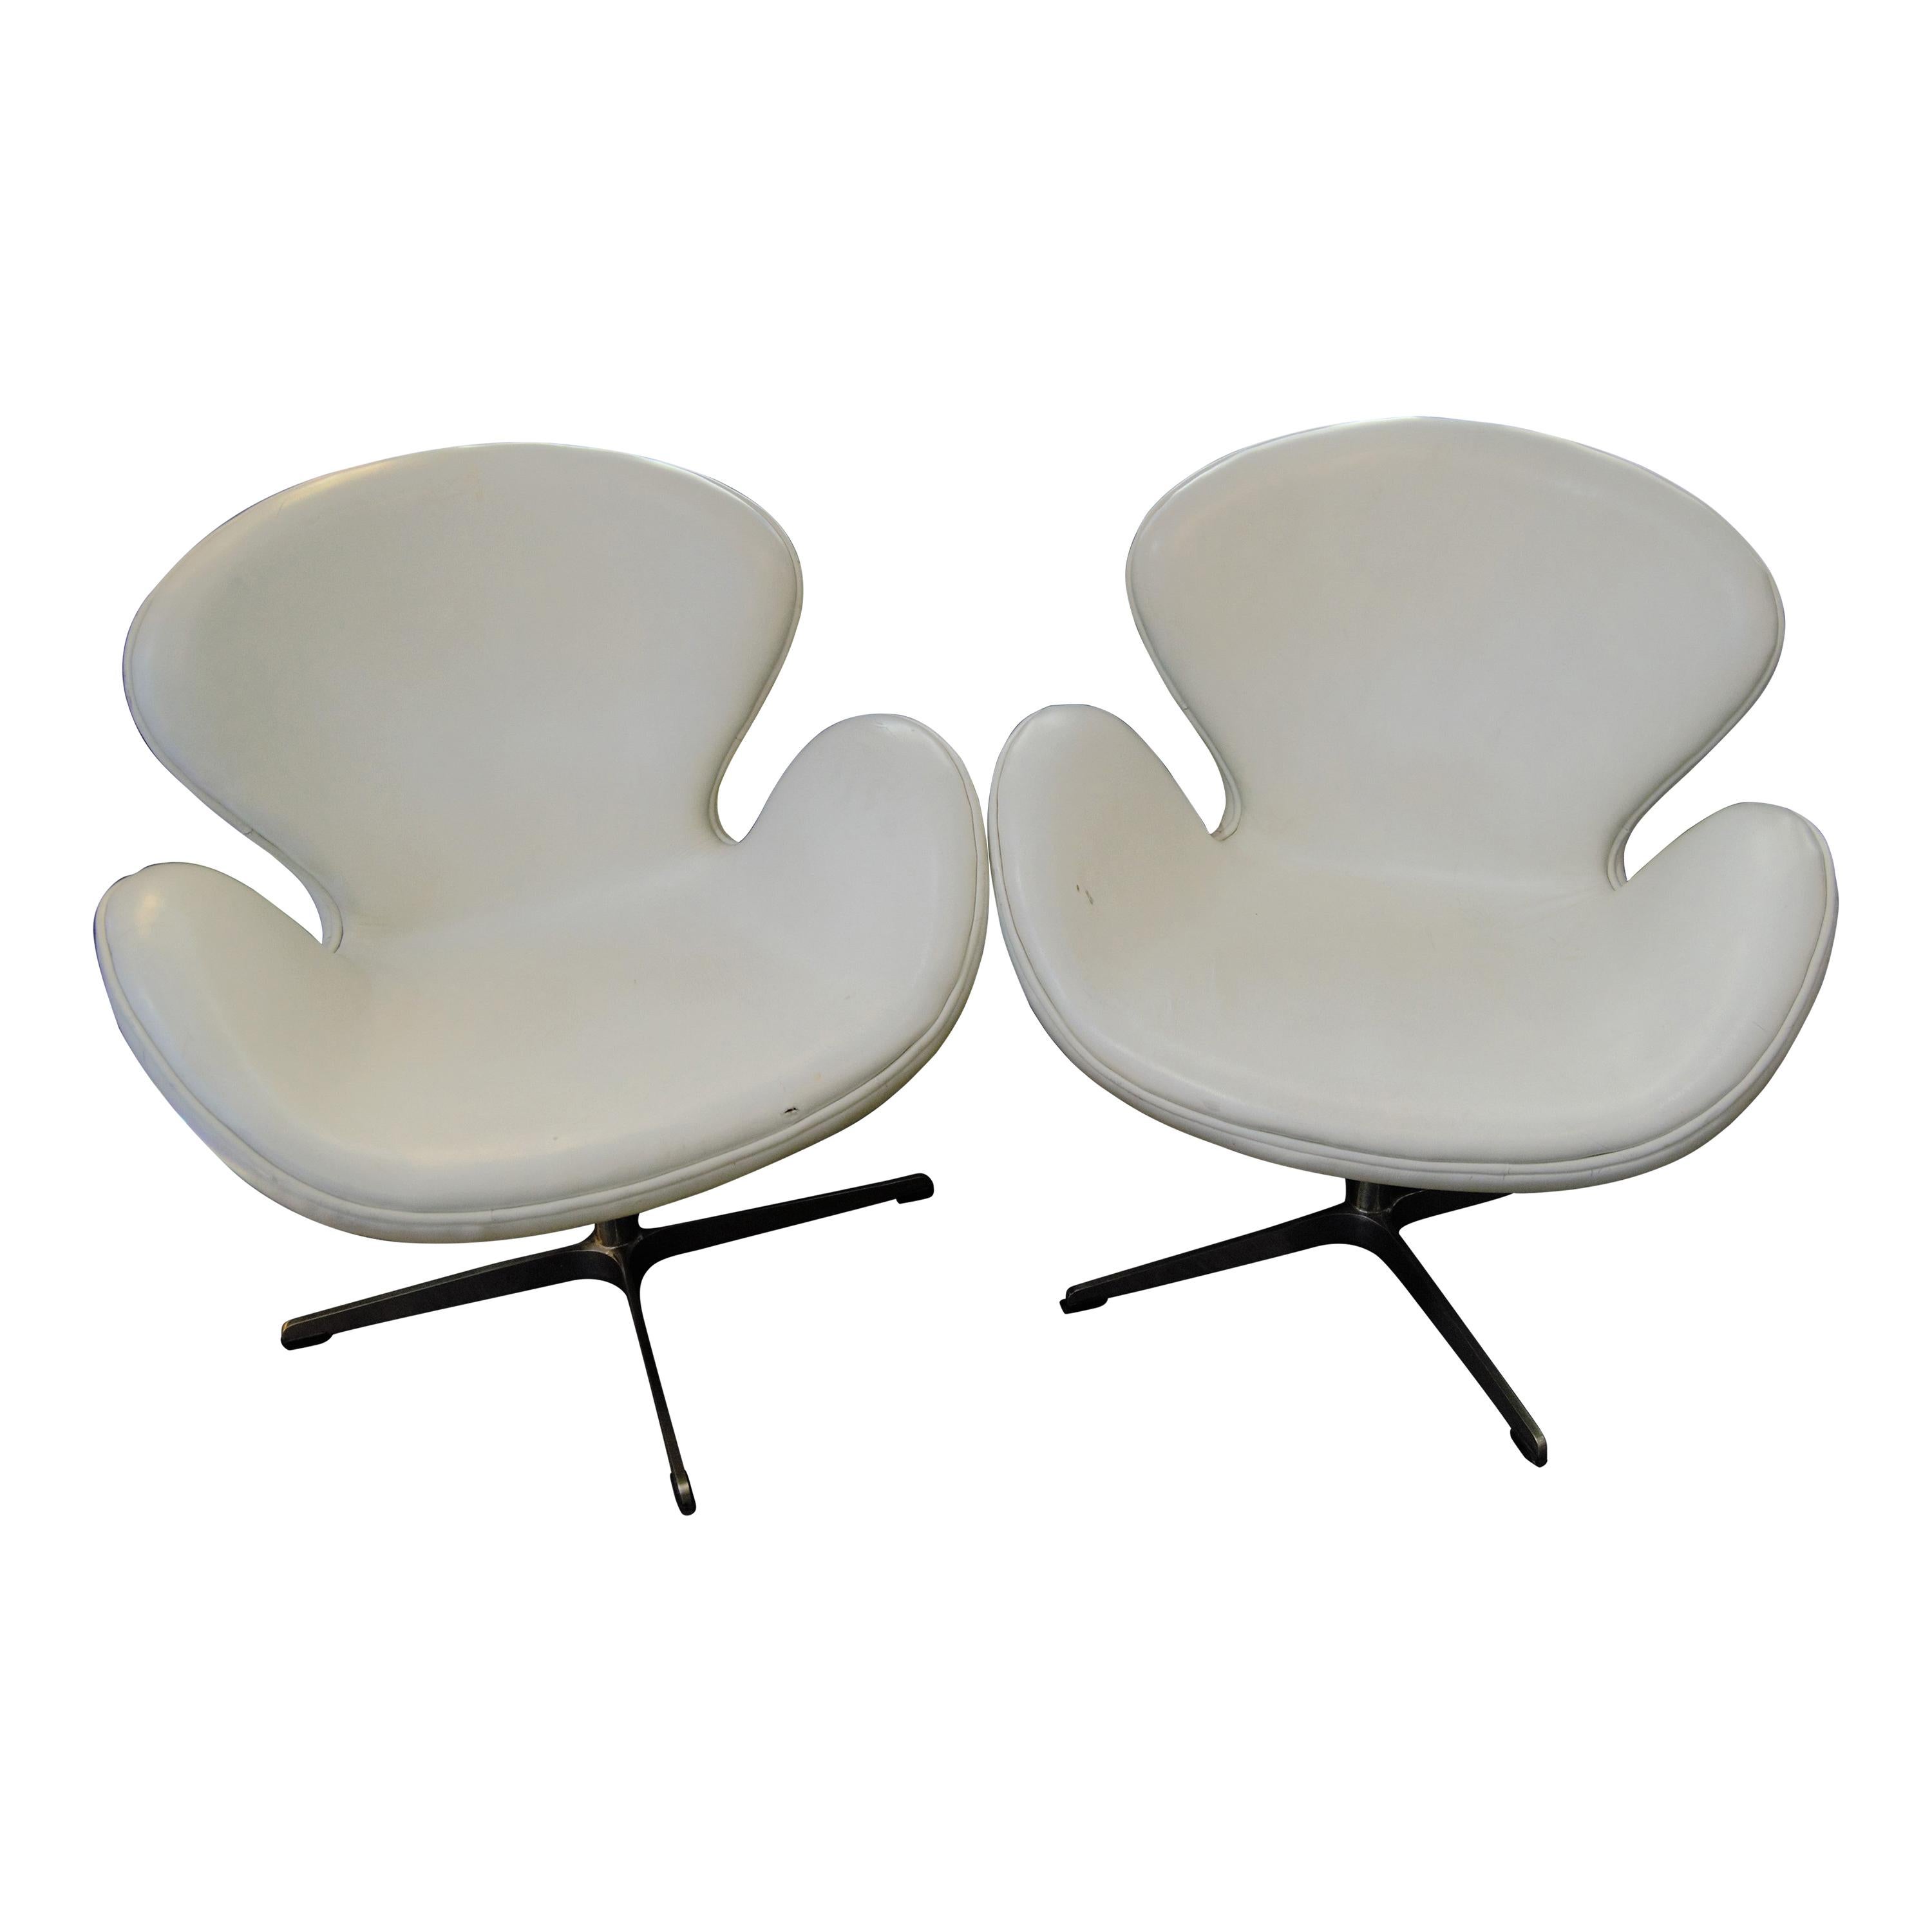 Arne Jacobsen, Pair of "Swan" Armchairs, White Leather, XXth For Sale